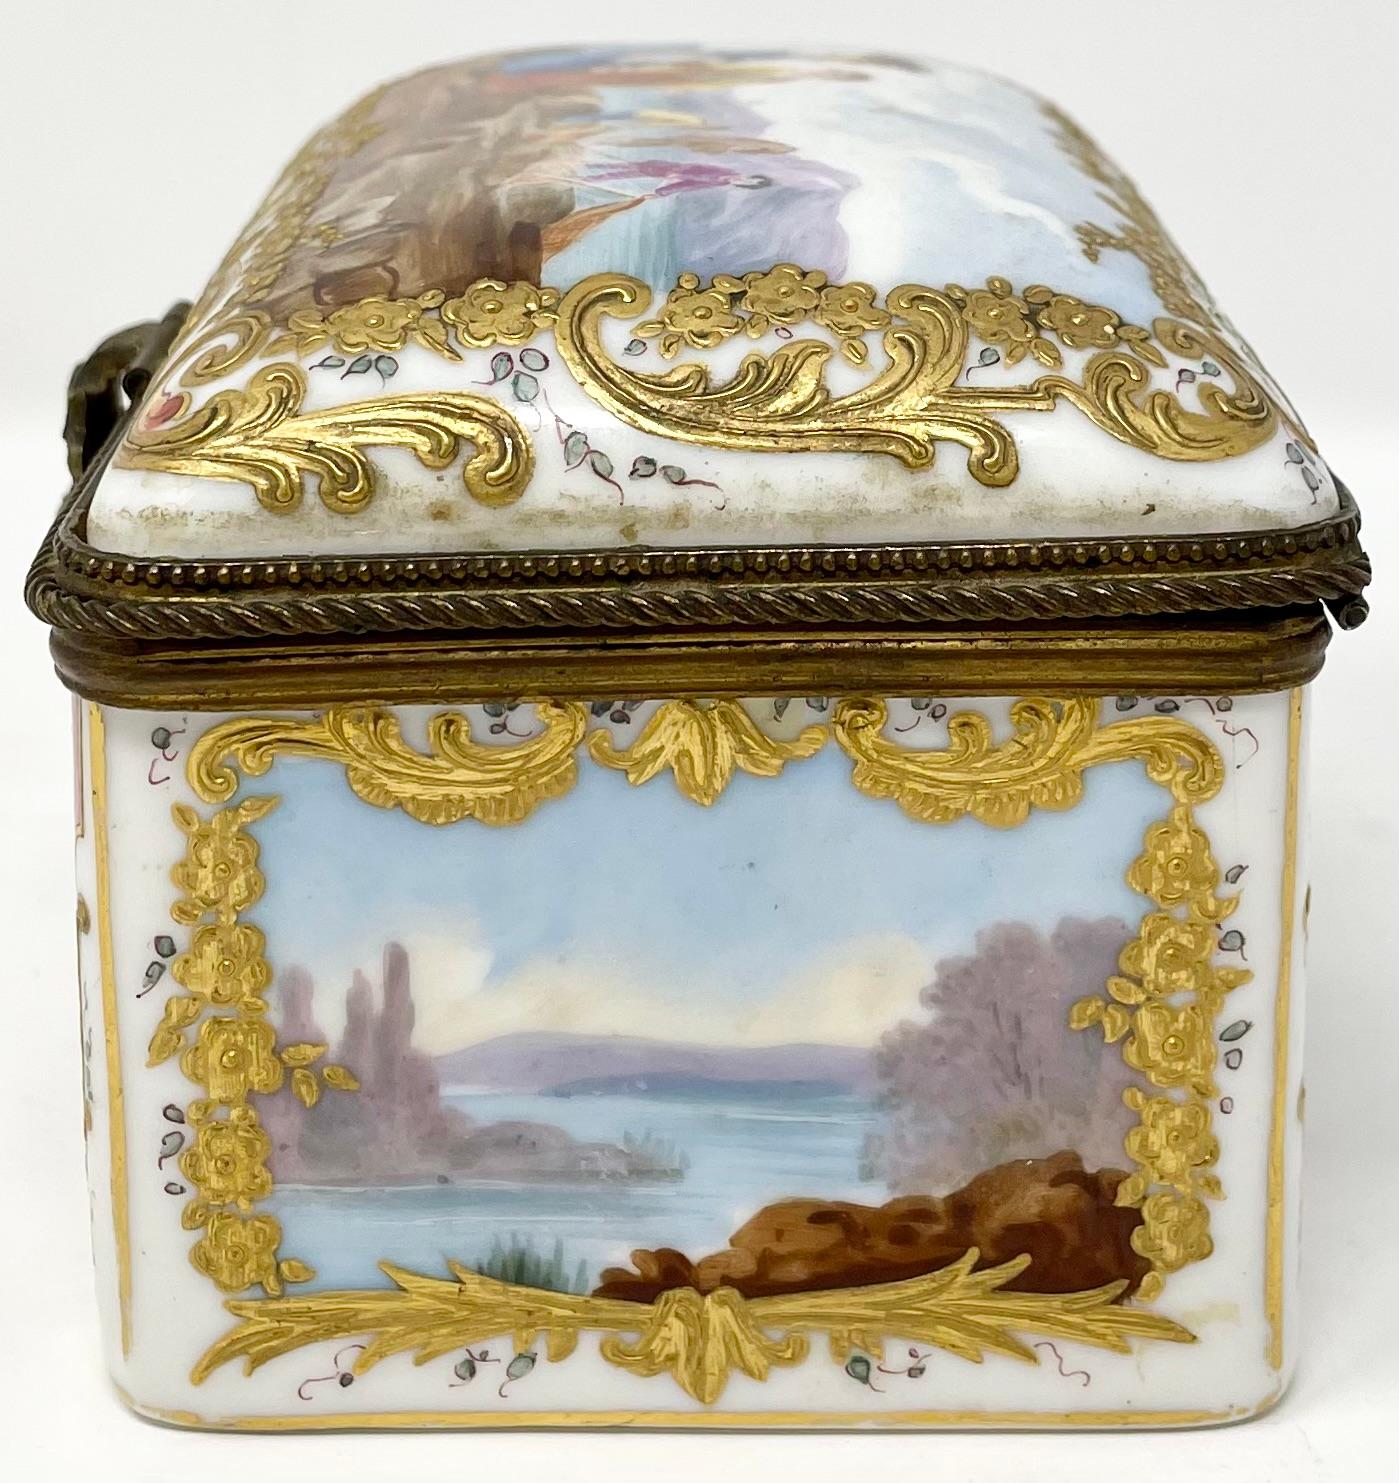 19th Century Antique German Dresden Porcelain Box with Delicate Painting, Circa 1860-1870. For Sale